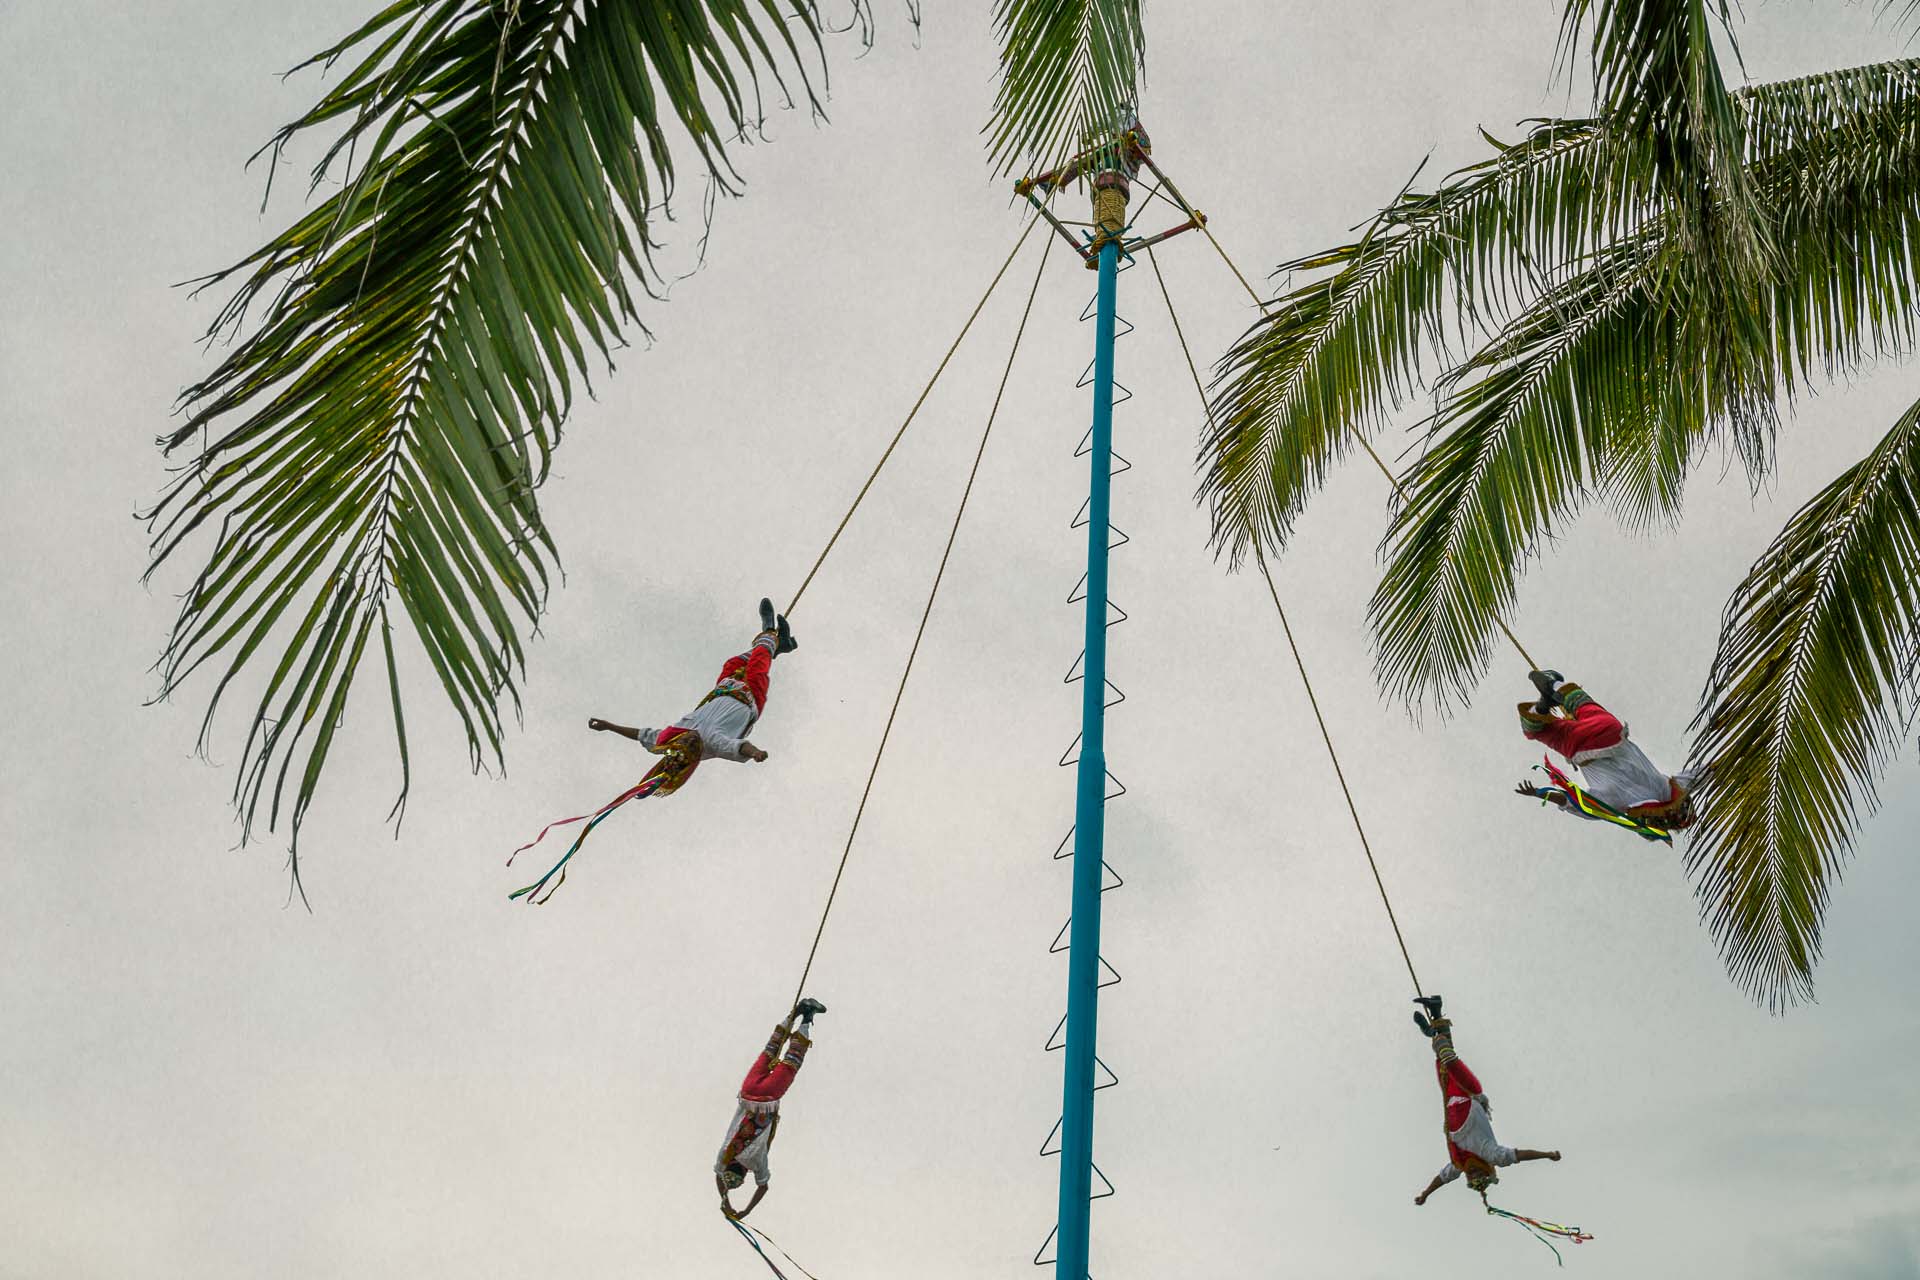 Another (impressive!)  show for the tourists: "Danza de los Voladores", four young men tied with ropes descending to the ground from a 30m vault accompanyed by music and dancing. Also known as the flying men.